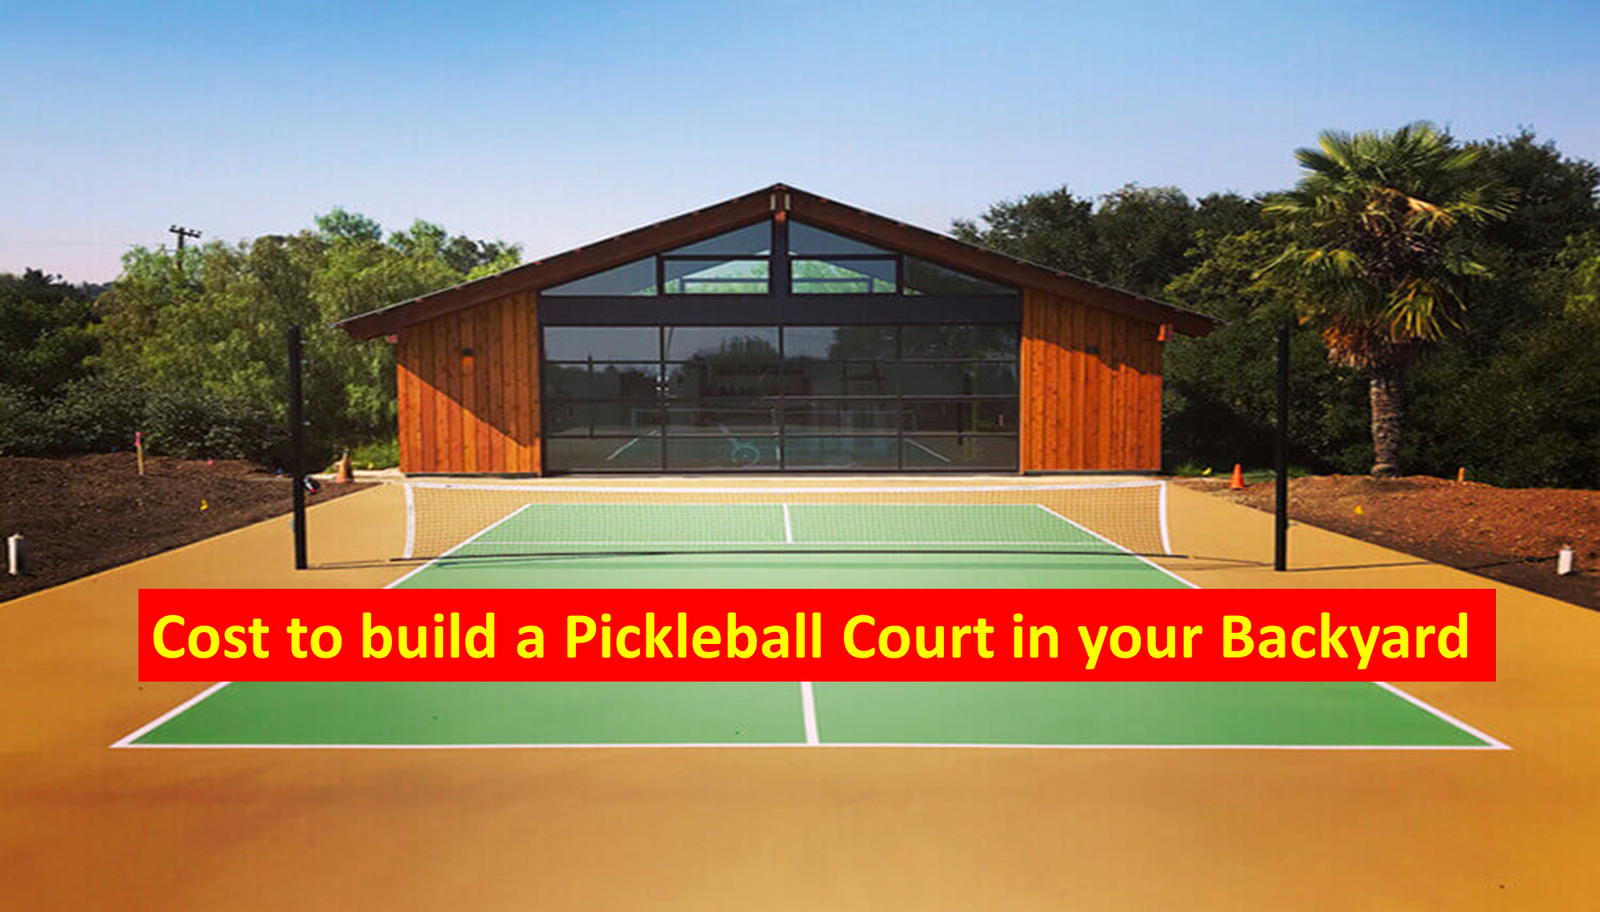 Cost to build a Pickleball Court in your Backyard